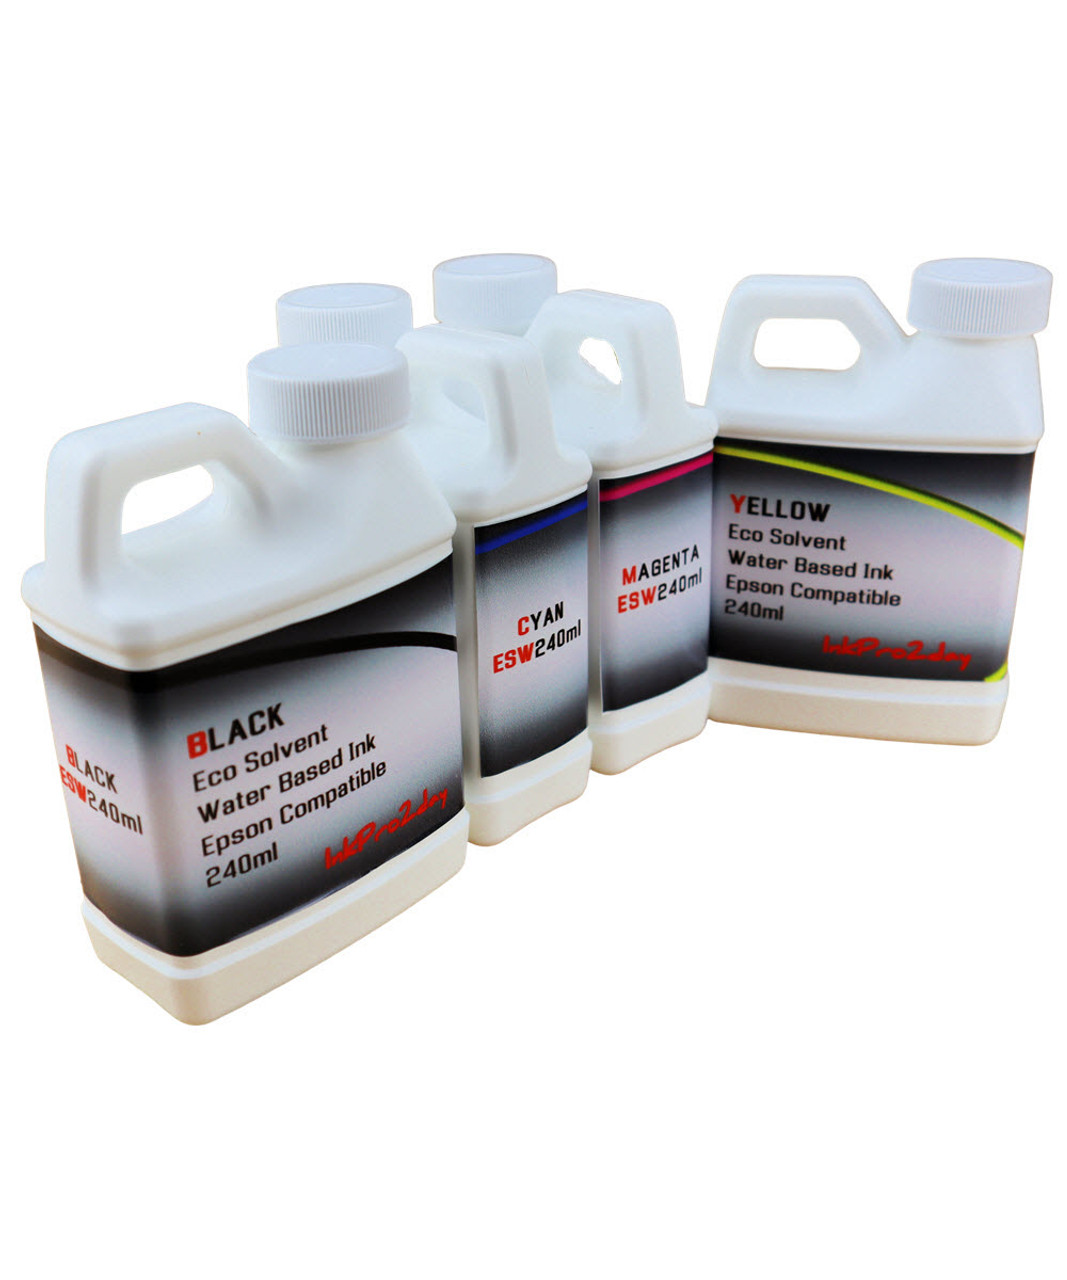 Eco Solvent Water Based Ink 4- 240ml bottles for EPSON WorkForce Pro WF-7310 WF-7820 WF-7840 printers